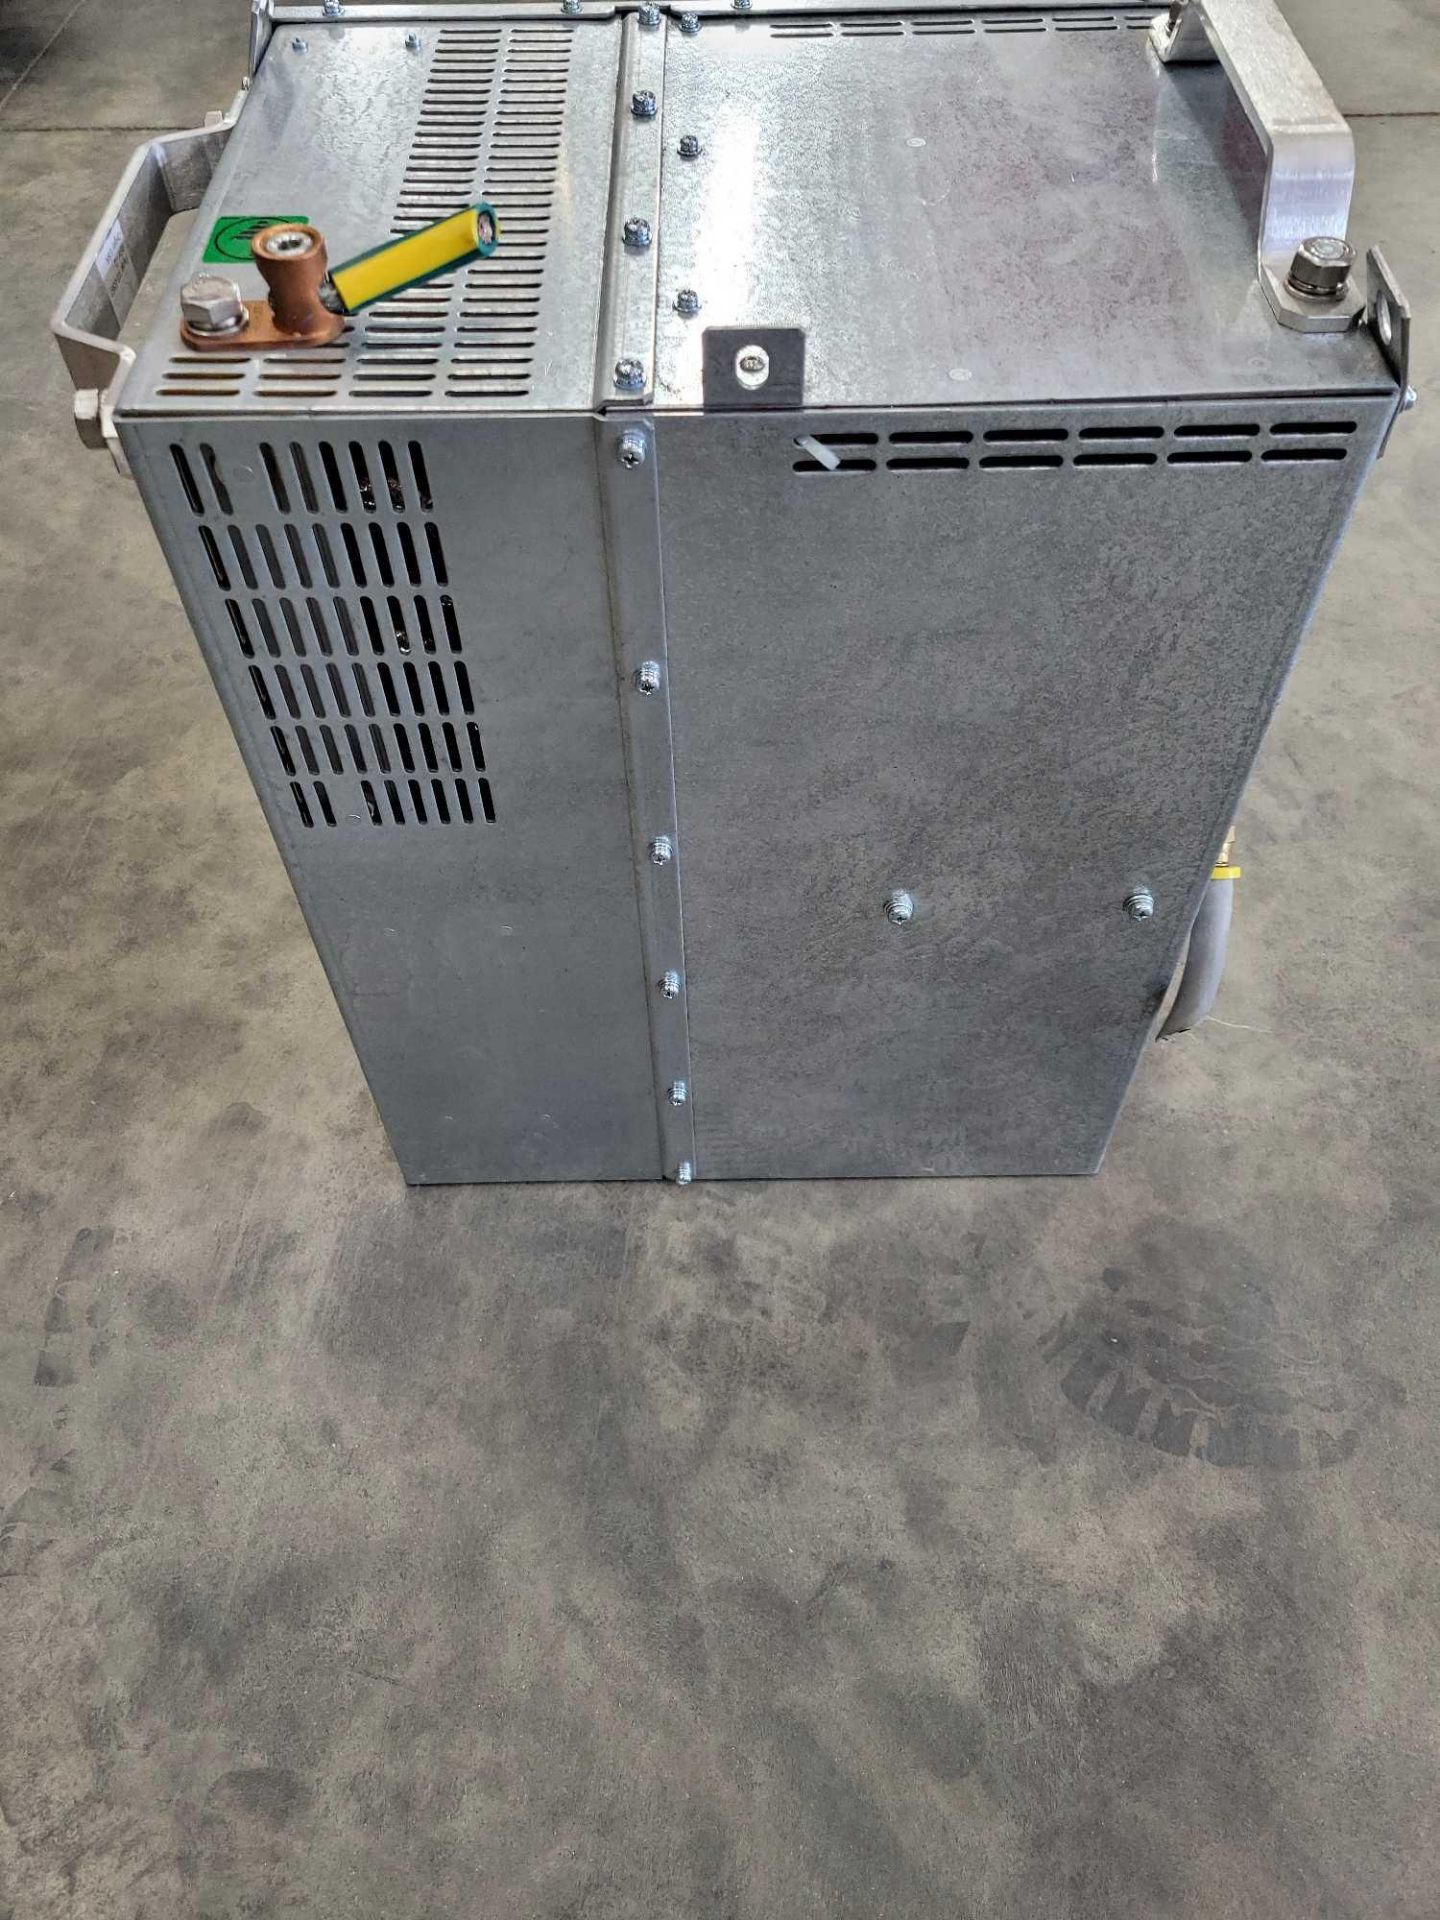 WTC 902-1200VR / Gen 6 MFDC Inverter  /  Lot Weight: 105 lbs - Image 4 of 5